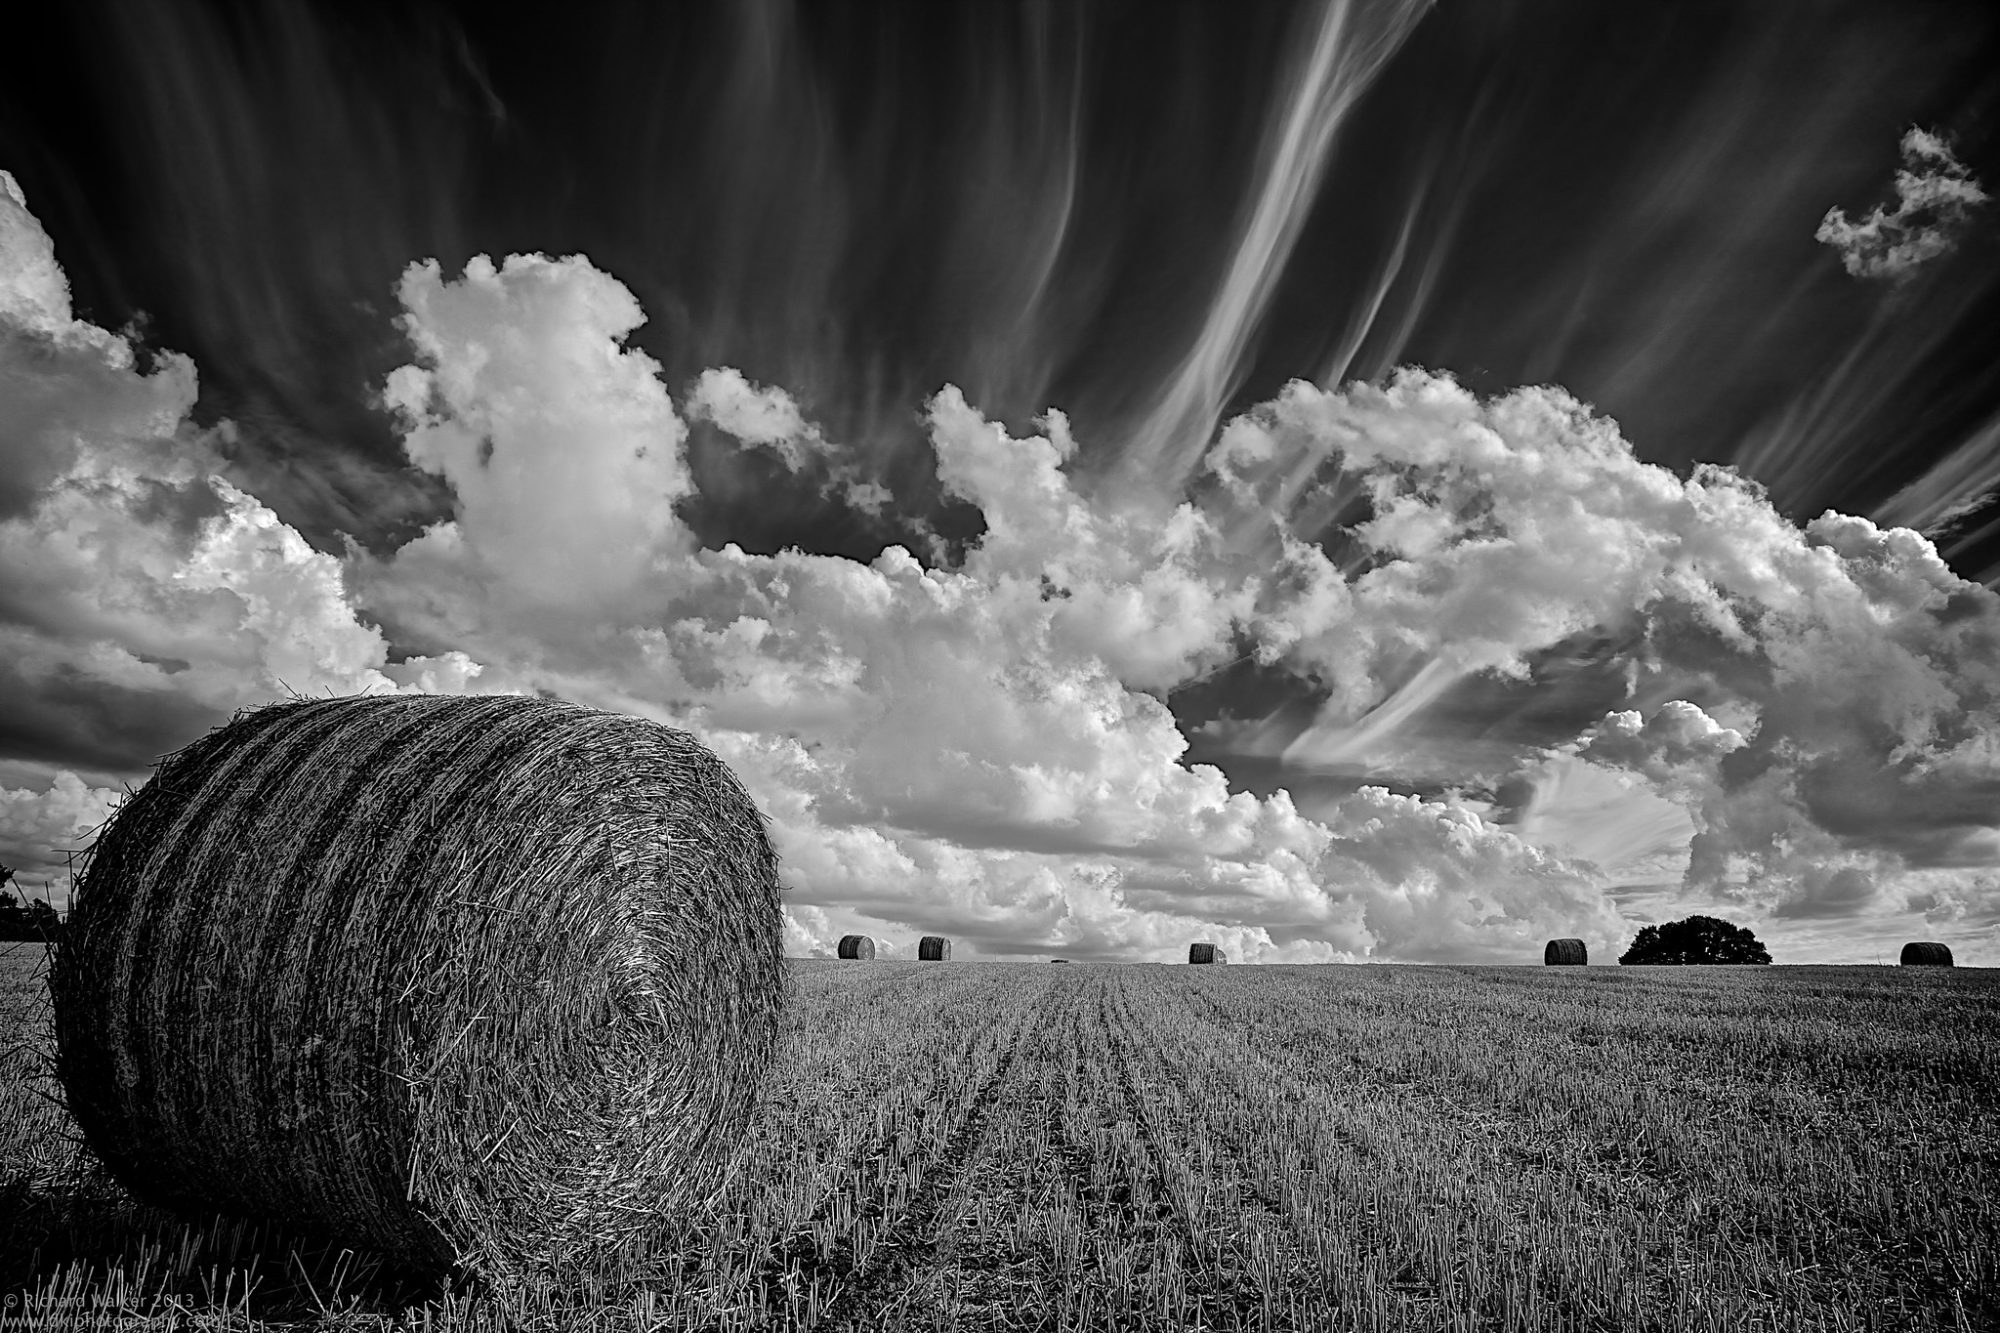 15 Amazing Black & White Landscape Photos That Will Leave You in Awe